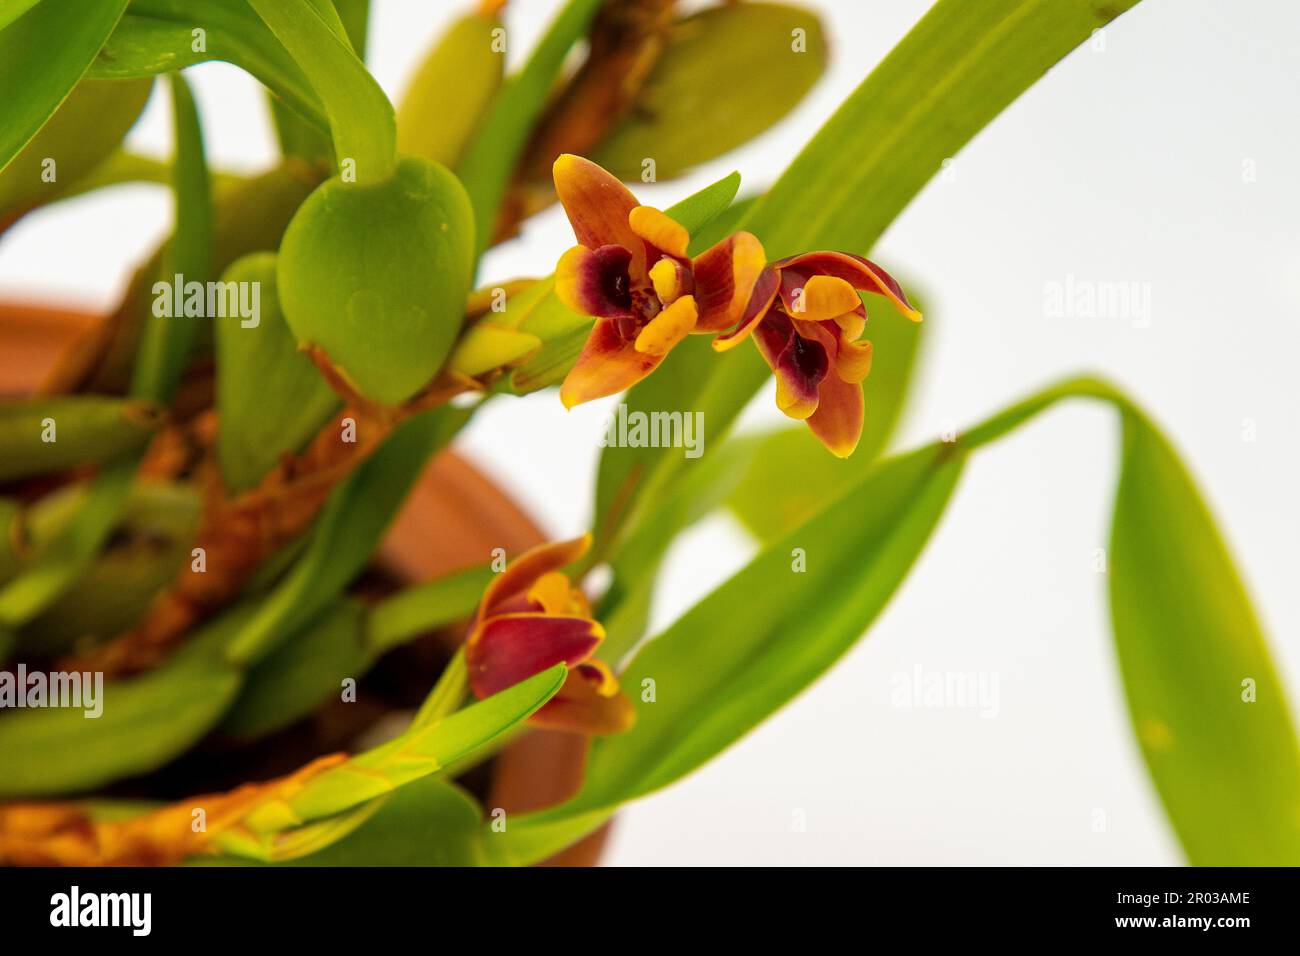 Maxillaria Variabilis Red orange yellow flower buds. Phalaenopsis flowering of a rare of orchids. White background. Big flowers pot garden cattleya orchidaceae family. Stock Photo